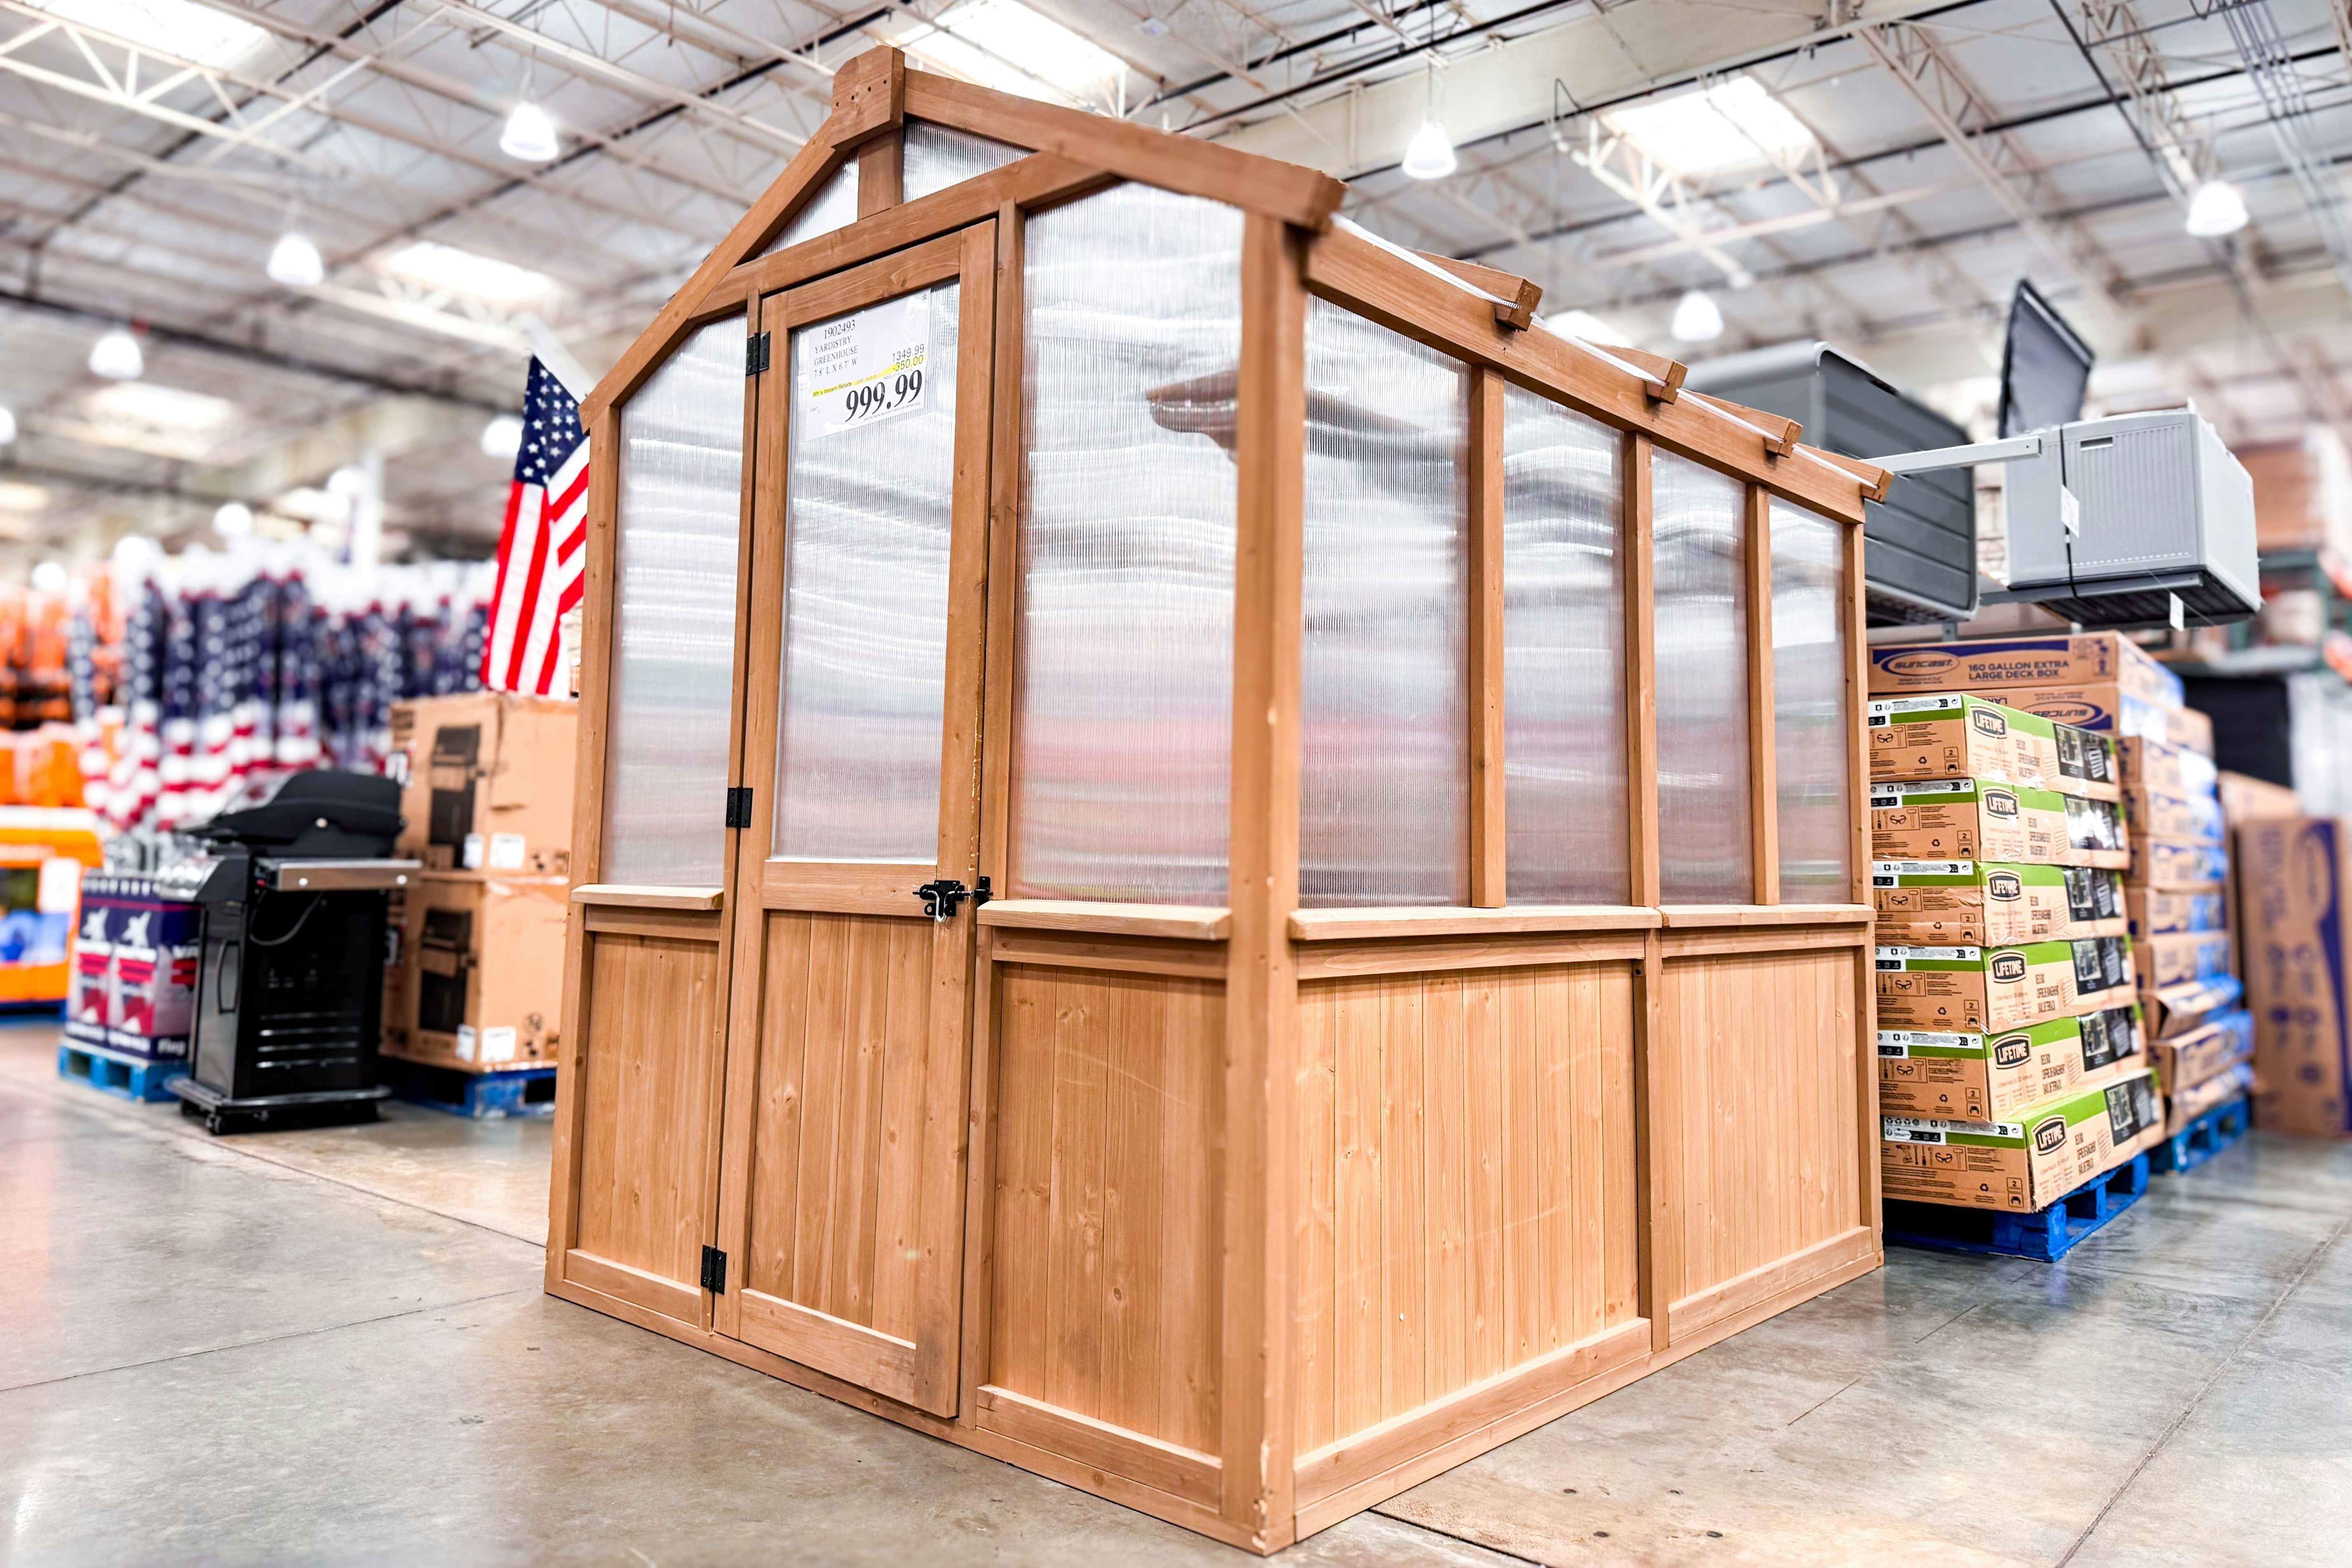 Price Drop on Yardistry Greenhouse, Now $999 at Costco (Reg. $1,349.99) 